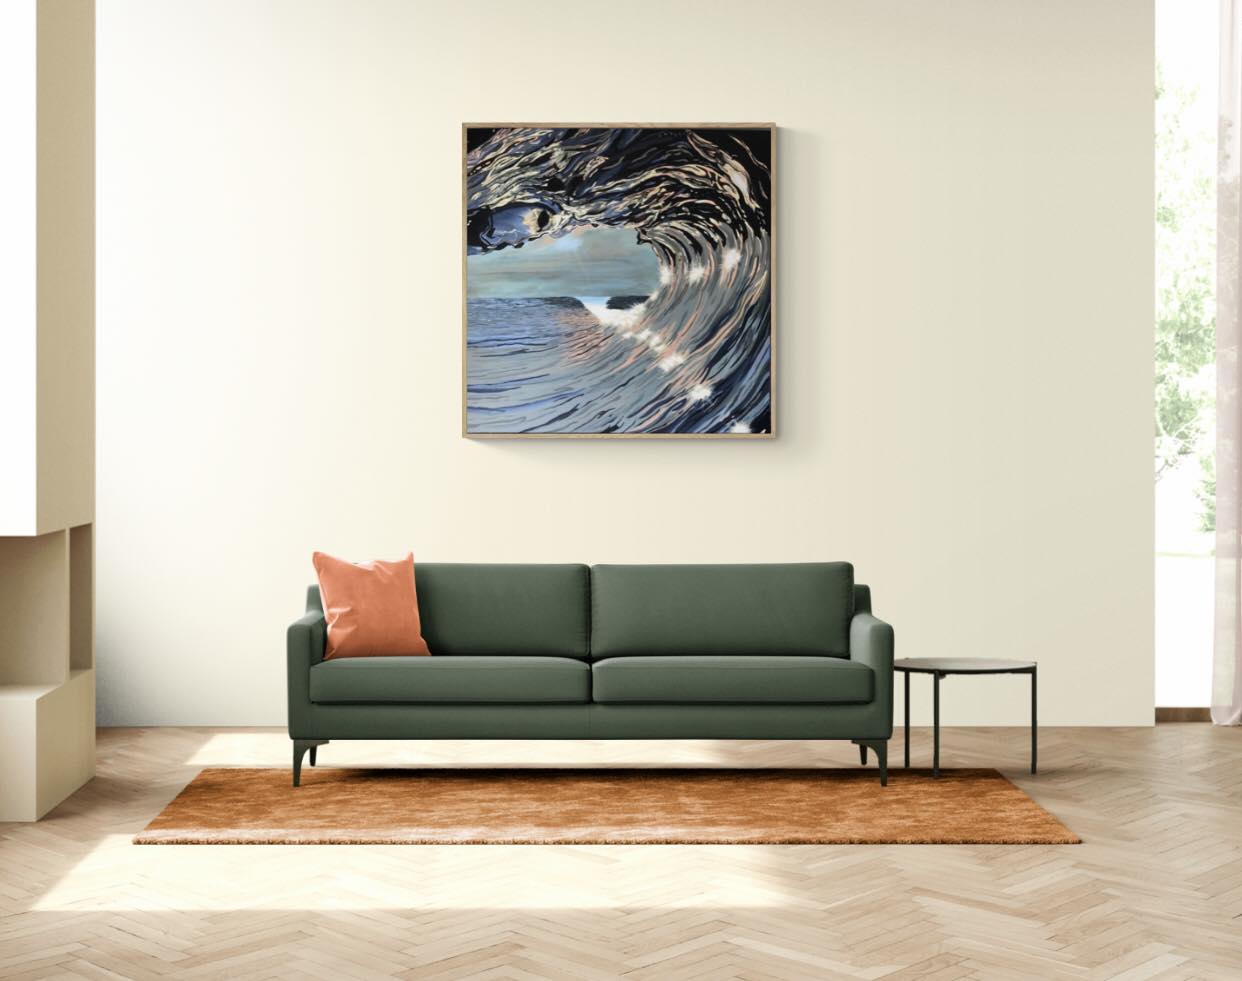 Golden Wave- SOLD, custom giclee prints available